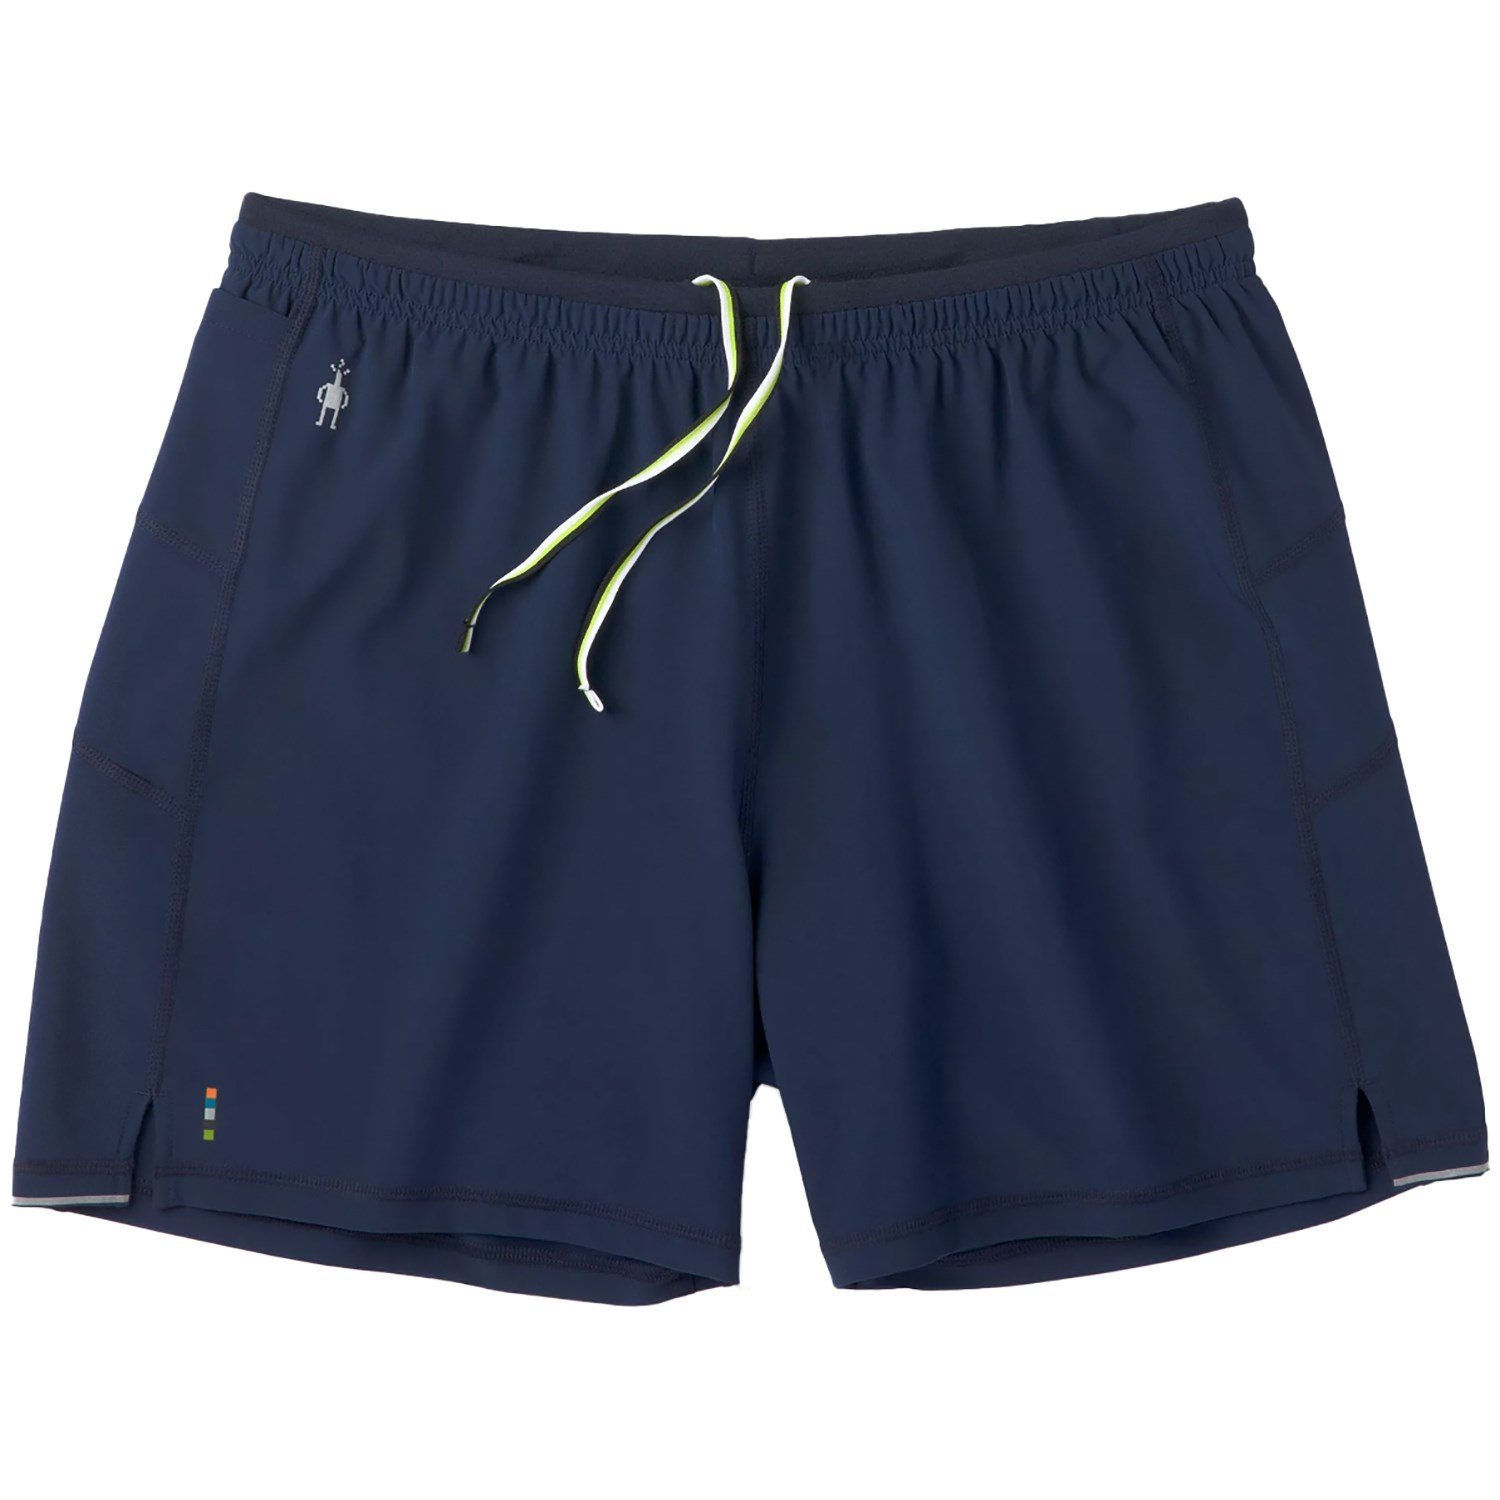 Up To 86% Off on Mens 2 in 1 Running Shorts Qu